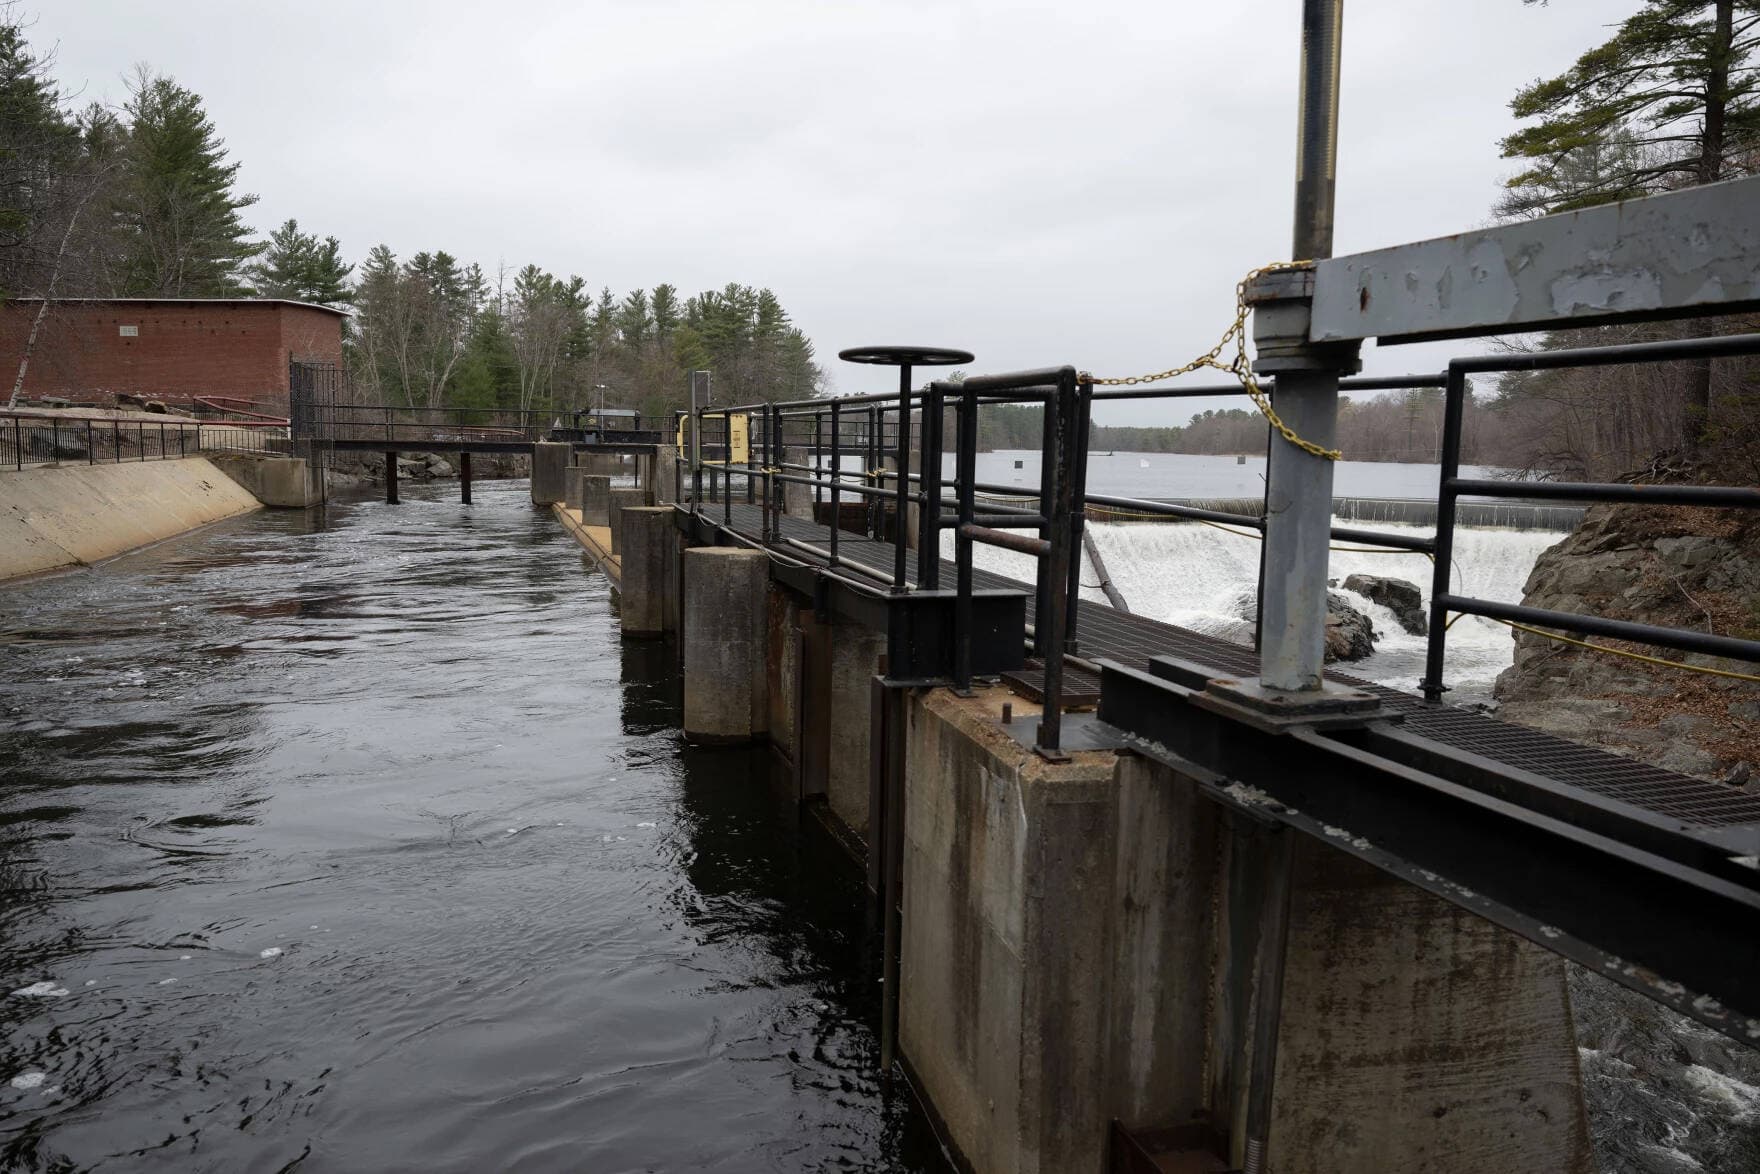 Water runs through the Mine Falls Hydroelectric Facility on April 5, in Nashua, N.H. Officials say these dams could be part of community power programs in the future. (Raquel C. Zaldívar/New England News Collaborative)